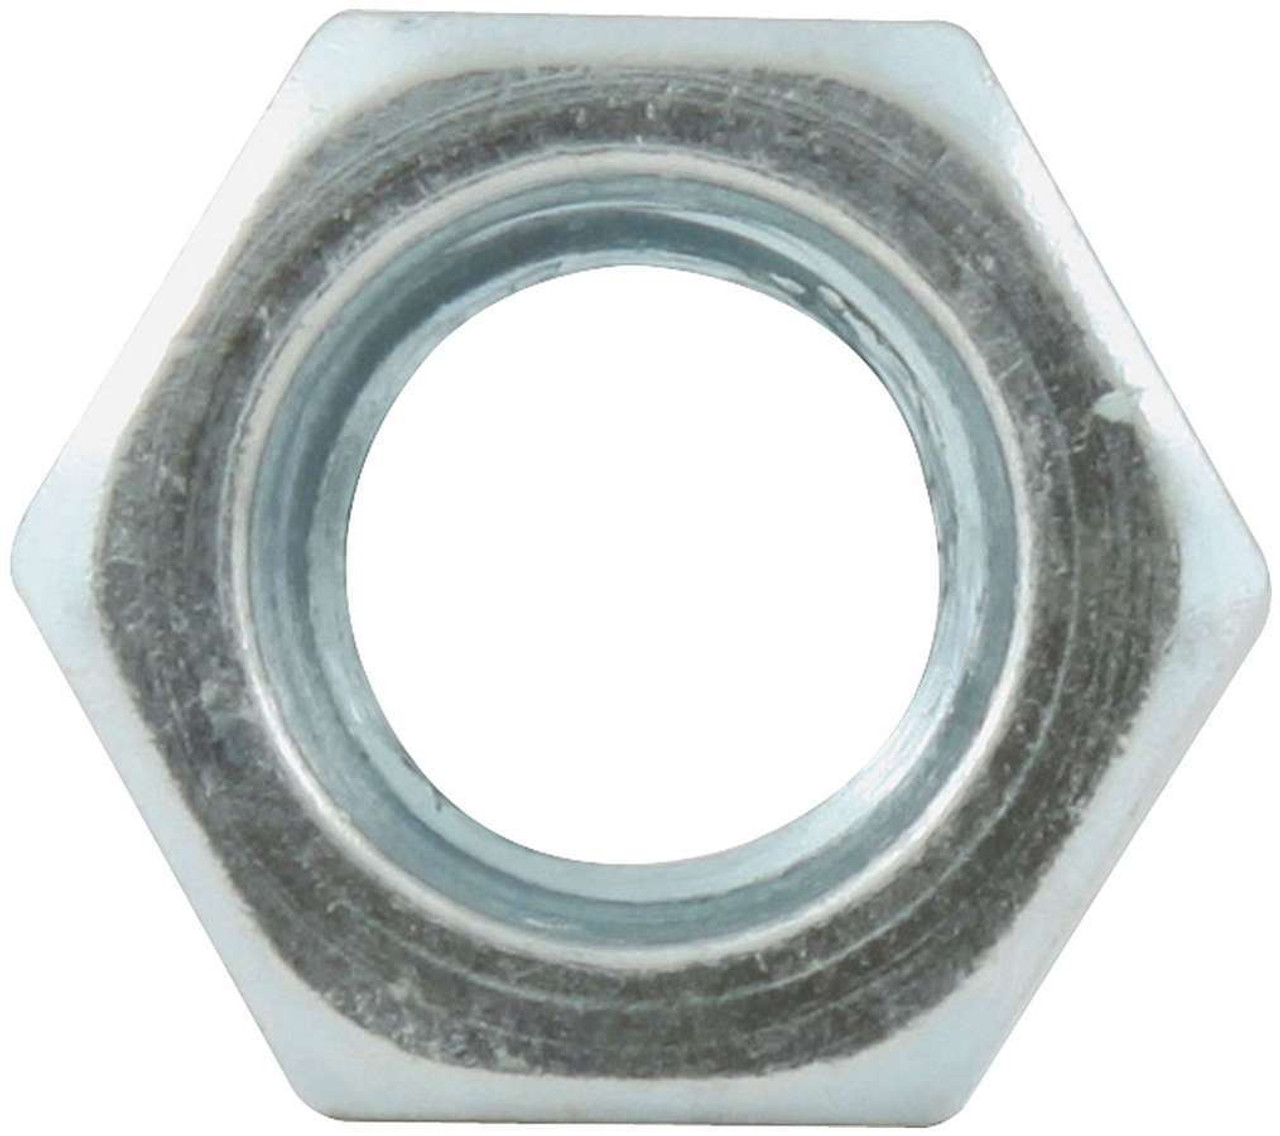 Hex Nuts 7/16-14 10pk